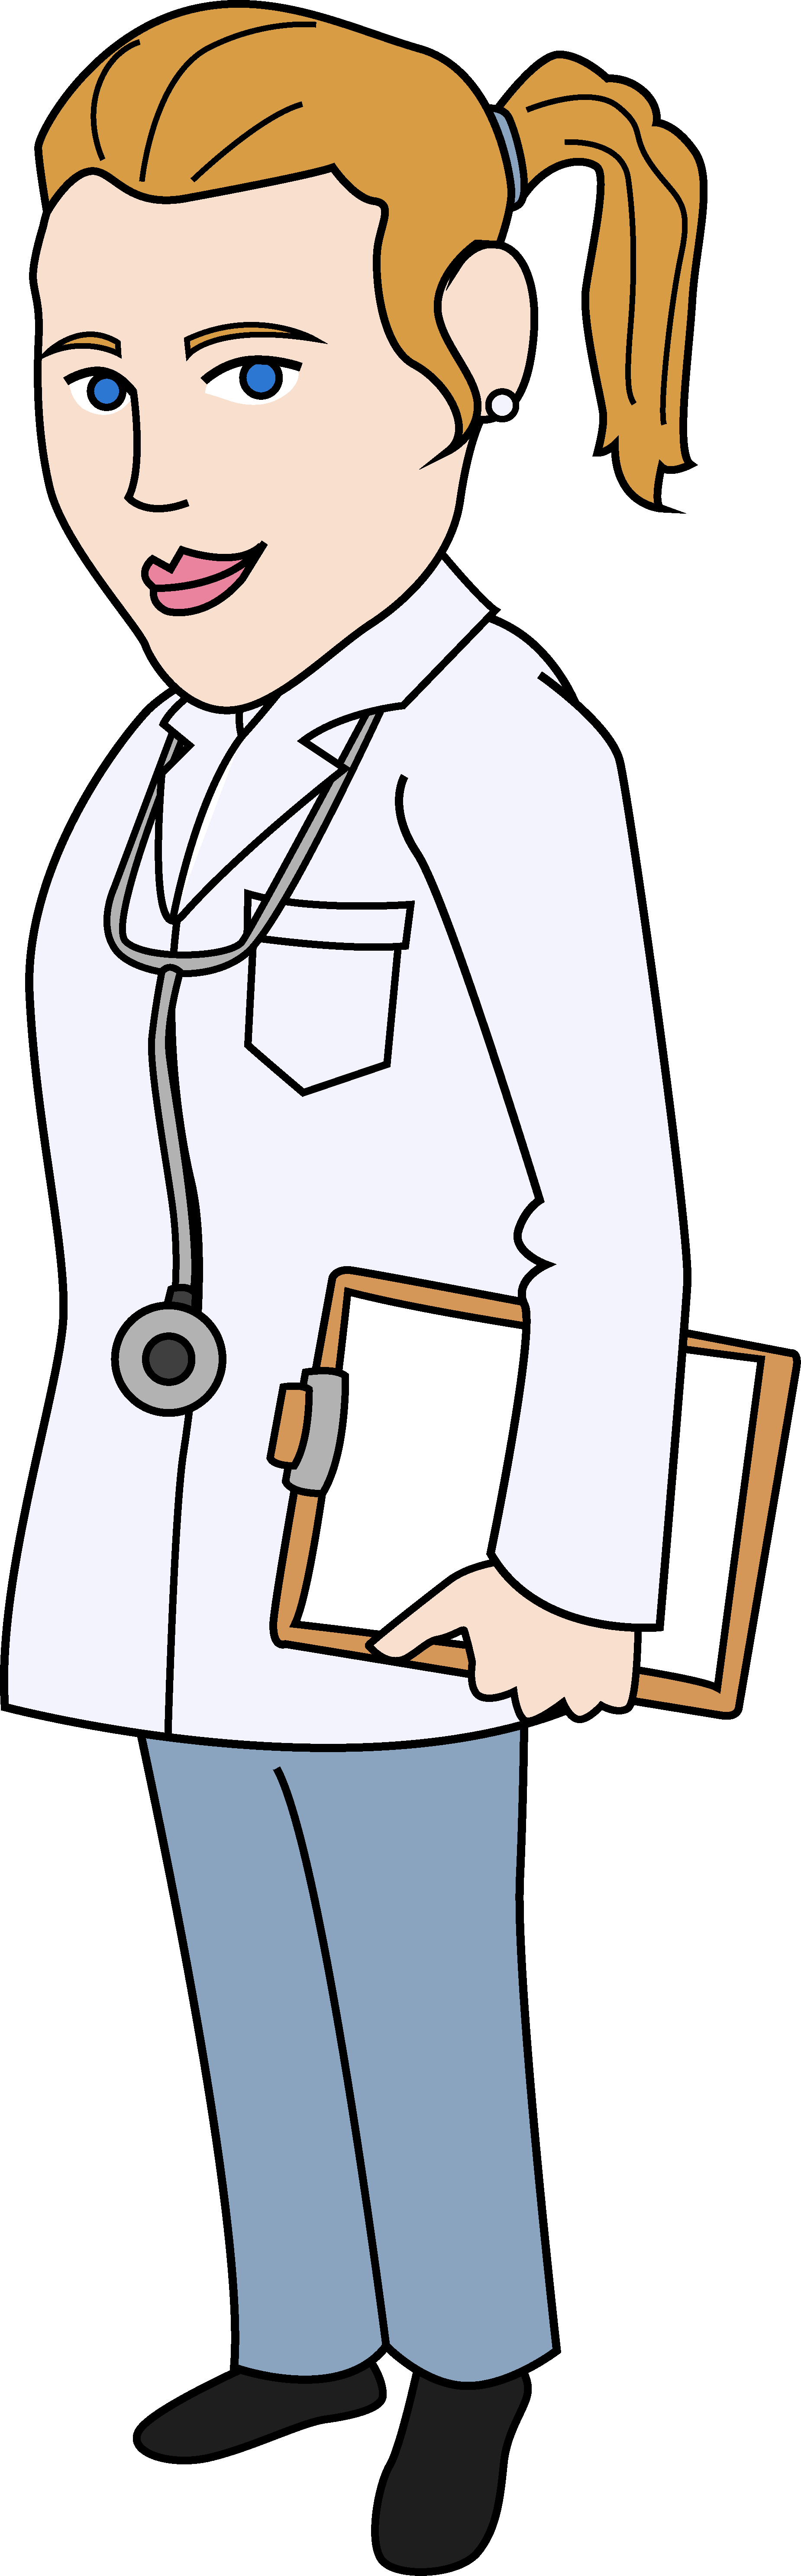 Doctors clipart general physician. Panda free images physicianclipart